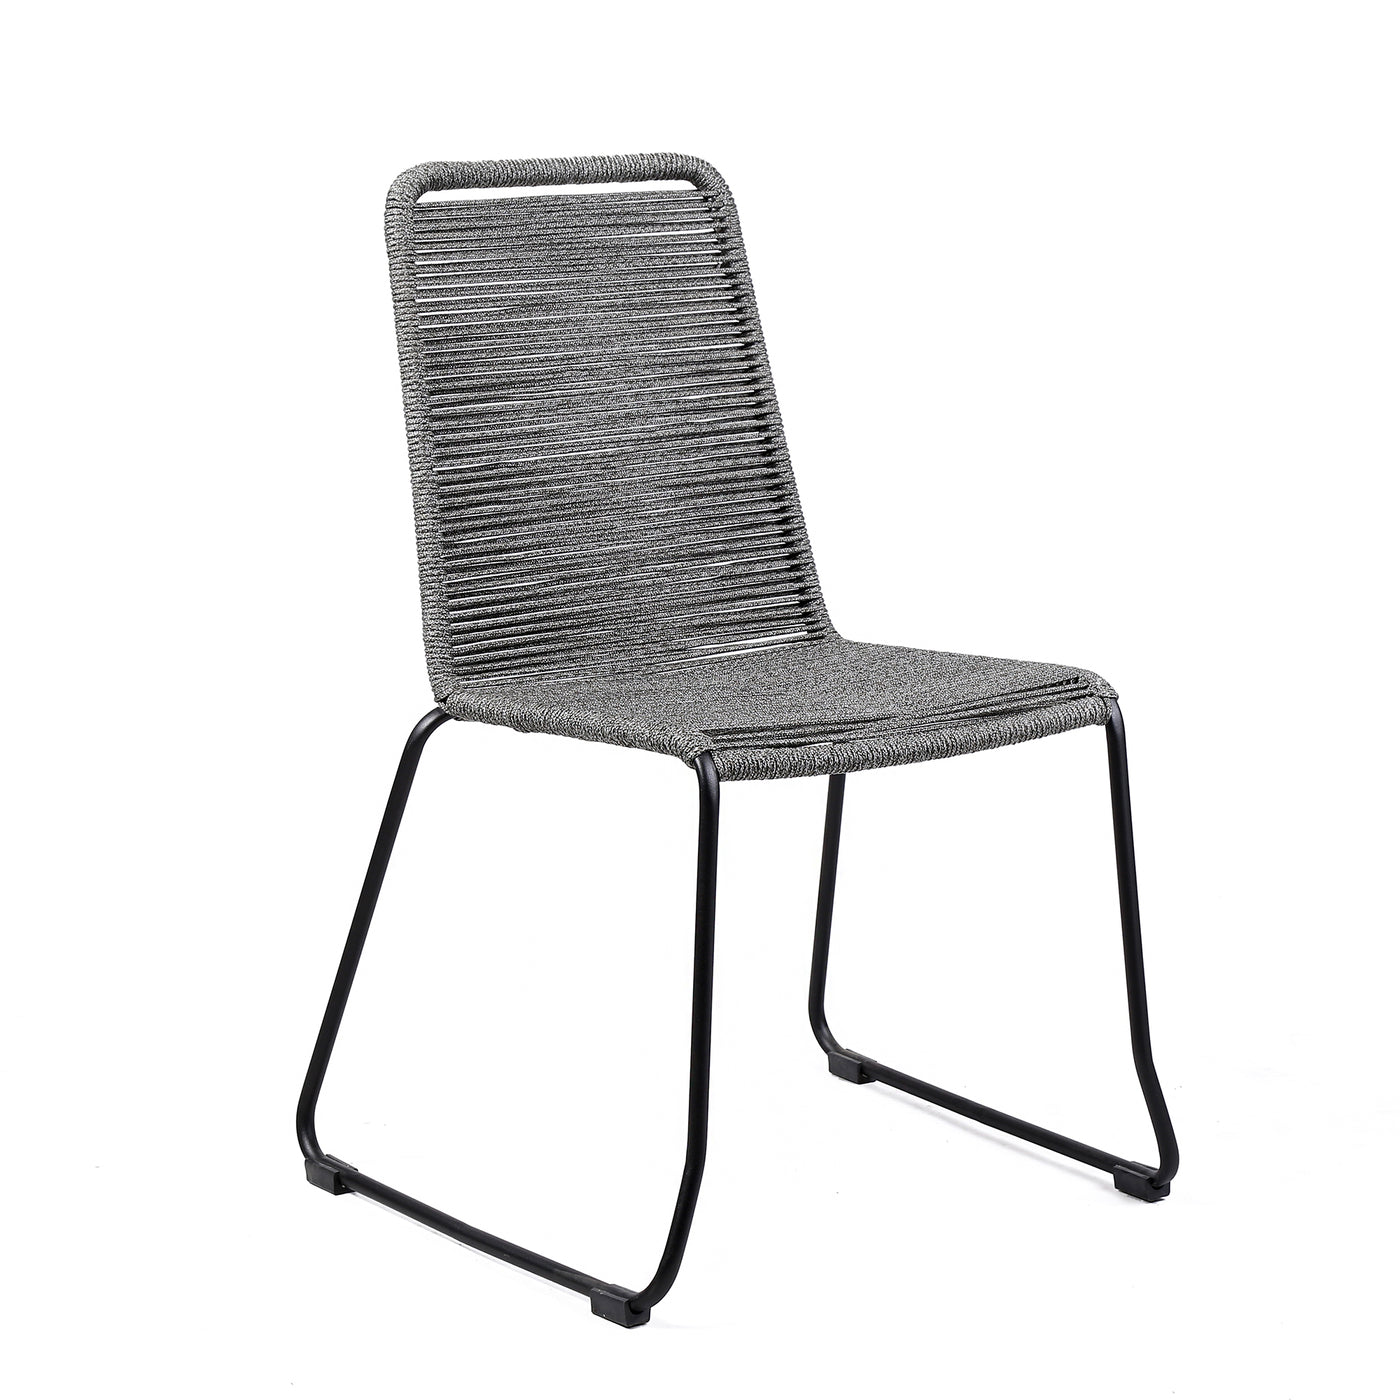 Shasta Outdoor Dining Chair Set of 2